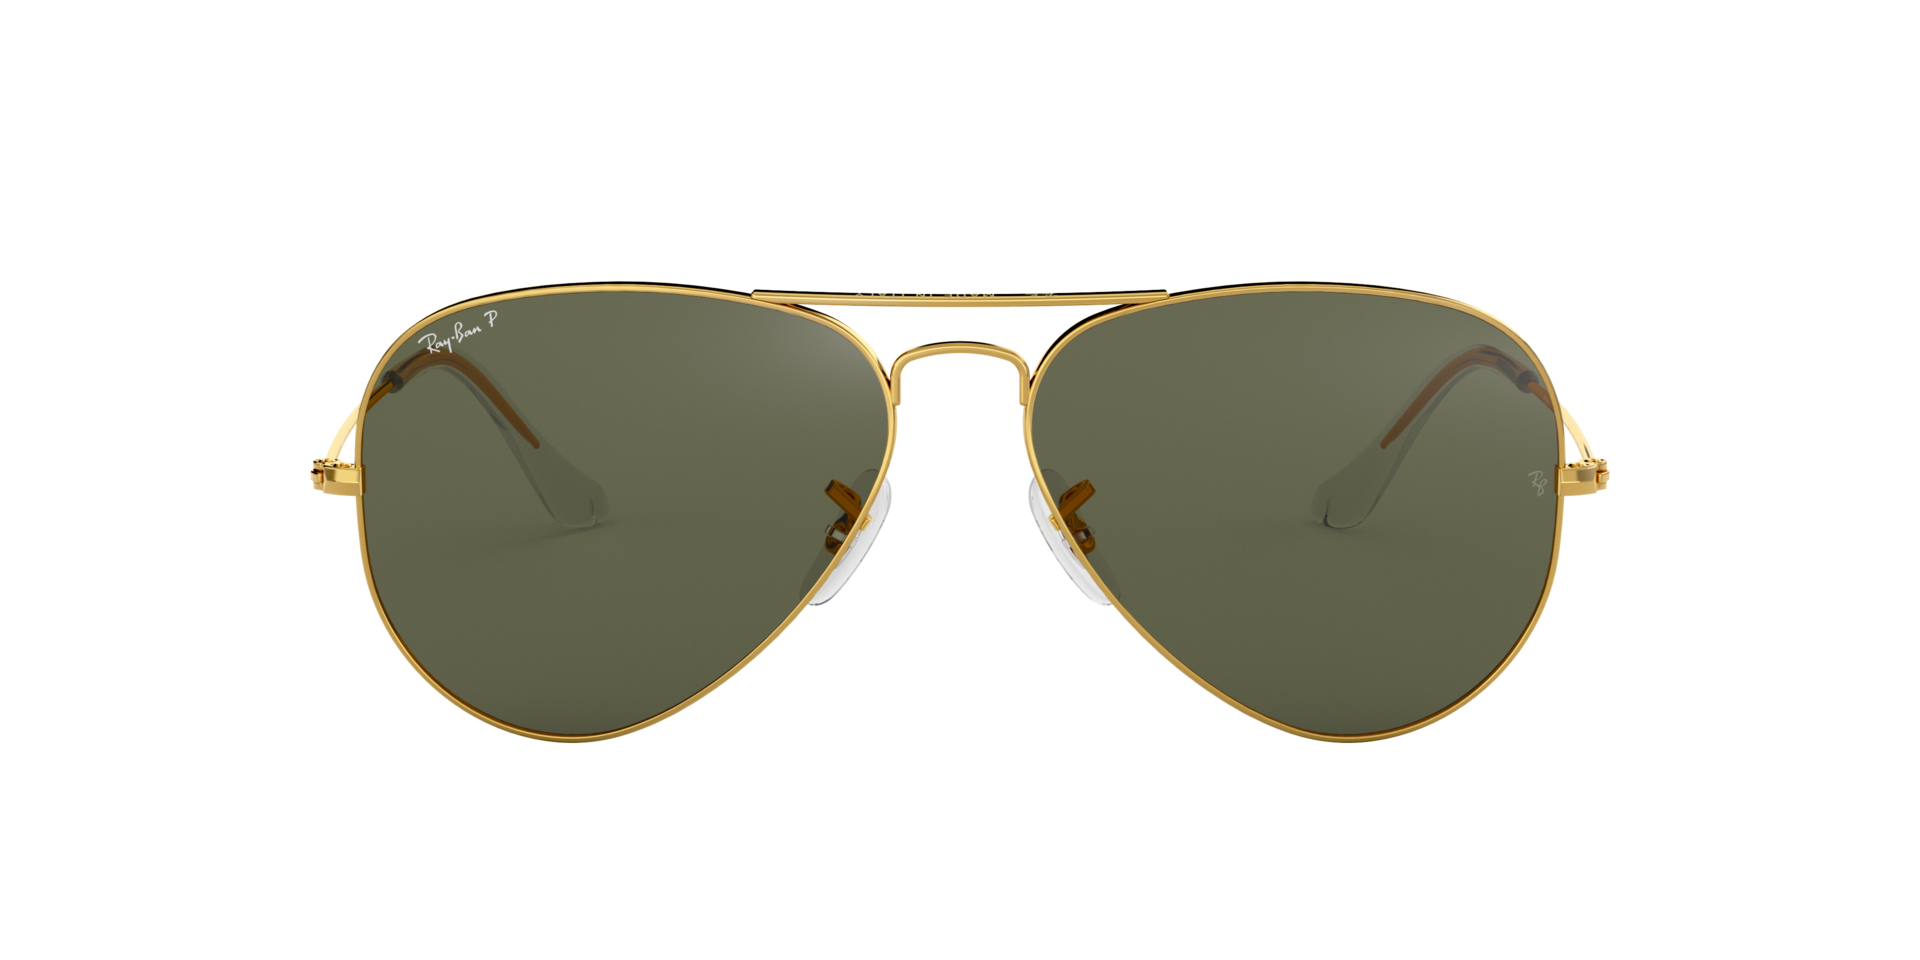 Ray Ban Aviator Large Metal Sonnenbrille RB3025 001/58 58